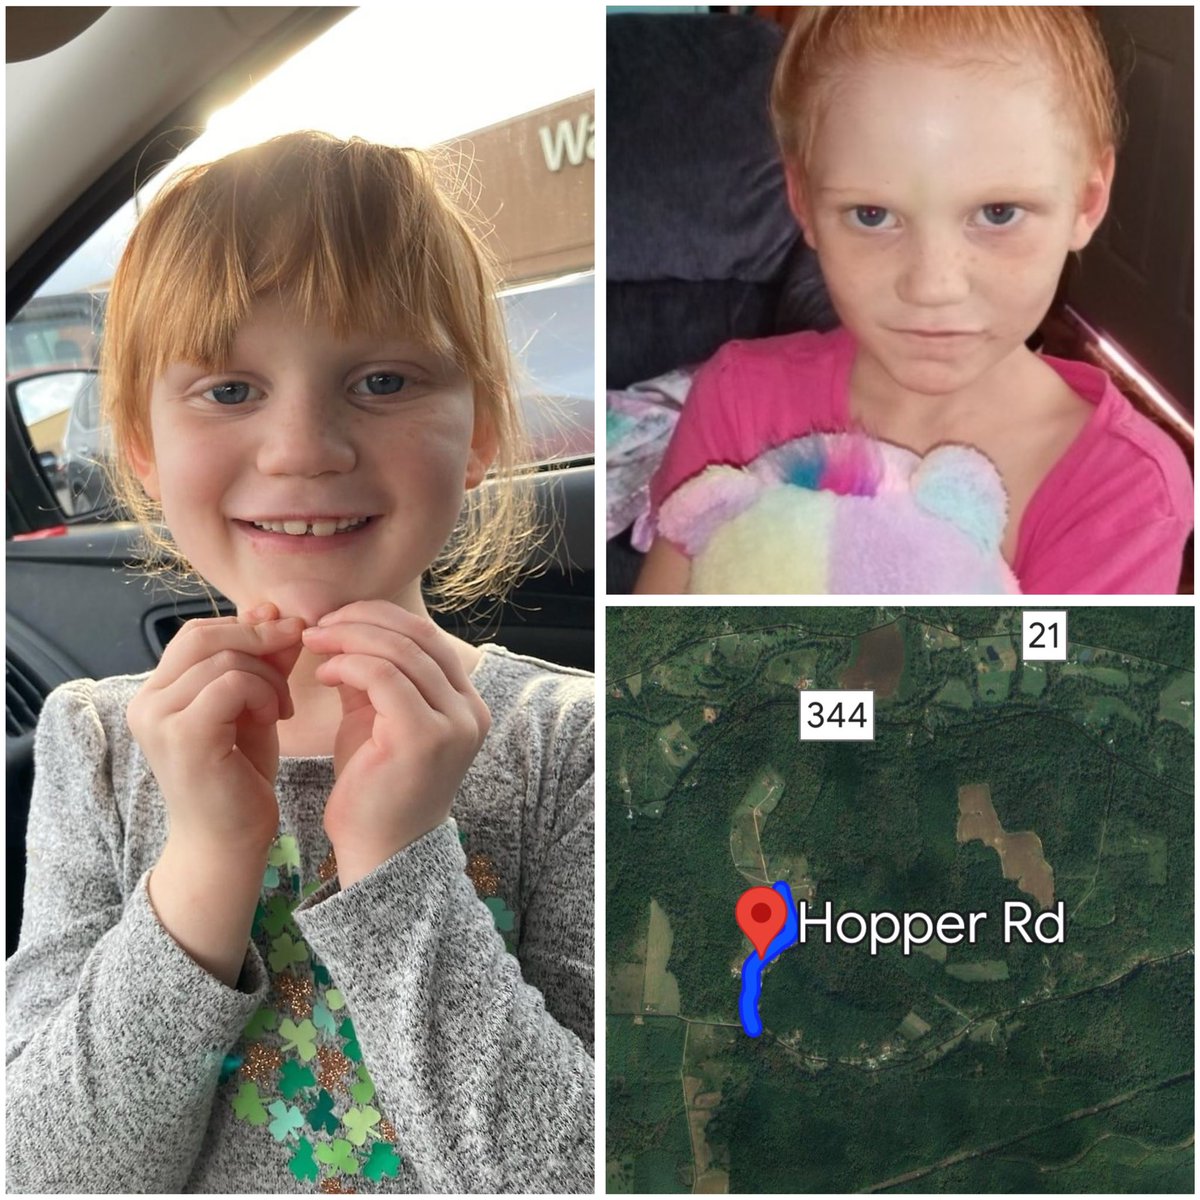 #Ohio : A search is underway for a missing special needs 6-year-old child in Pike County. The child was reported missing from her home in the 100 block of Hopper Road around 6:30 a.m. today. The child’s name is Aries Marie Flannery. She is described as being 4’ 1’’ tall, 50-60…